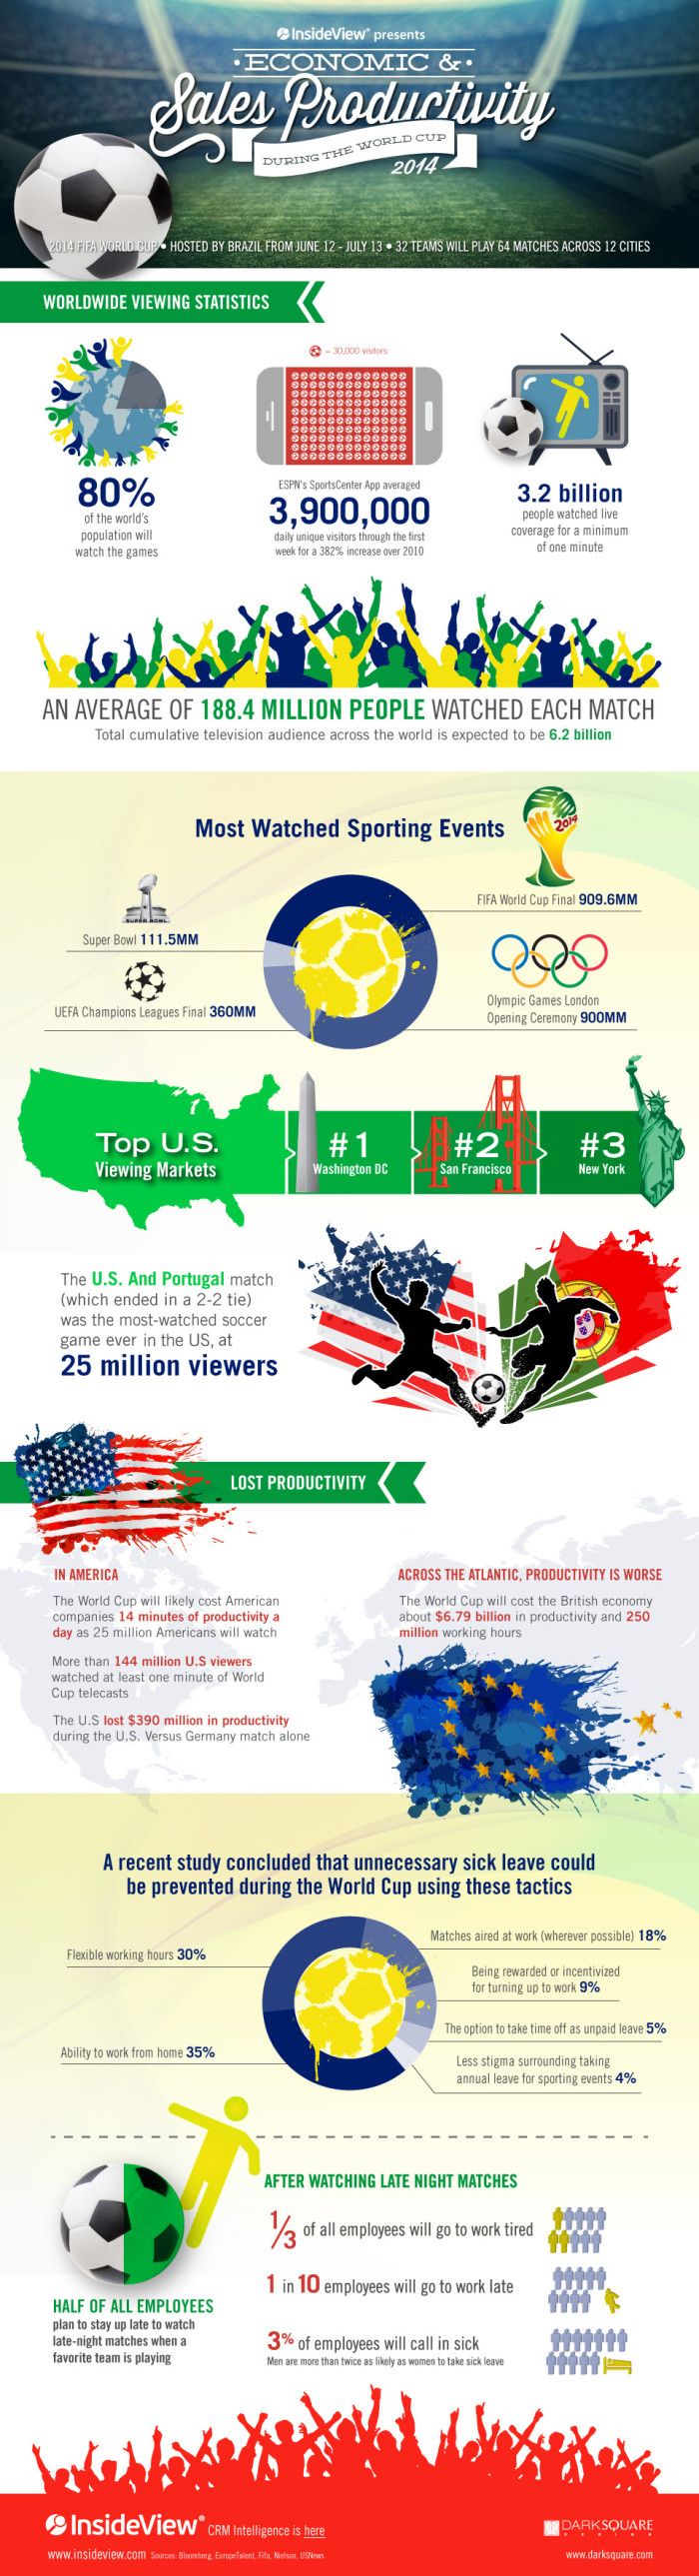 Productivity During the 2014 World Cup [Infographic]